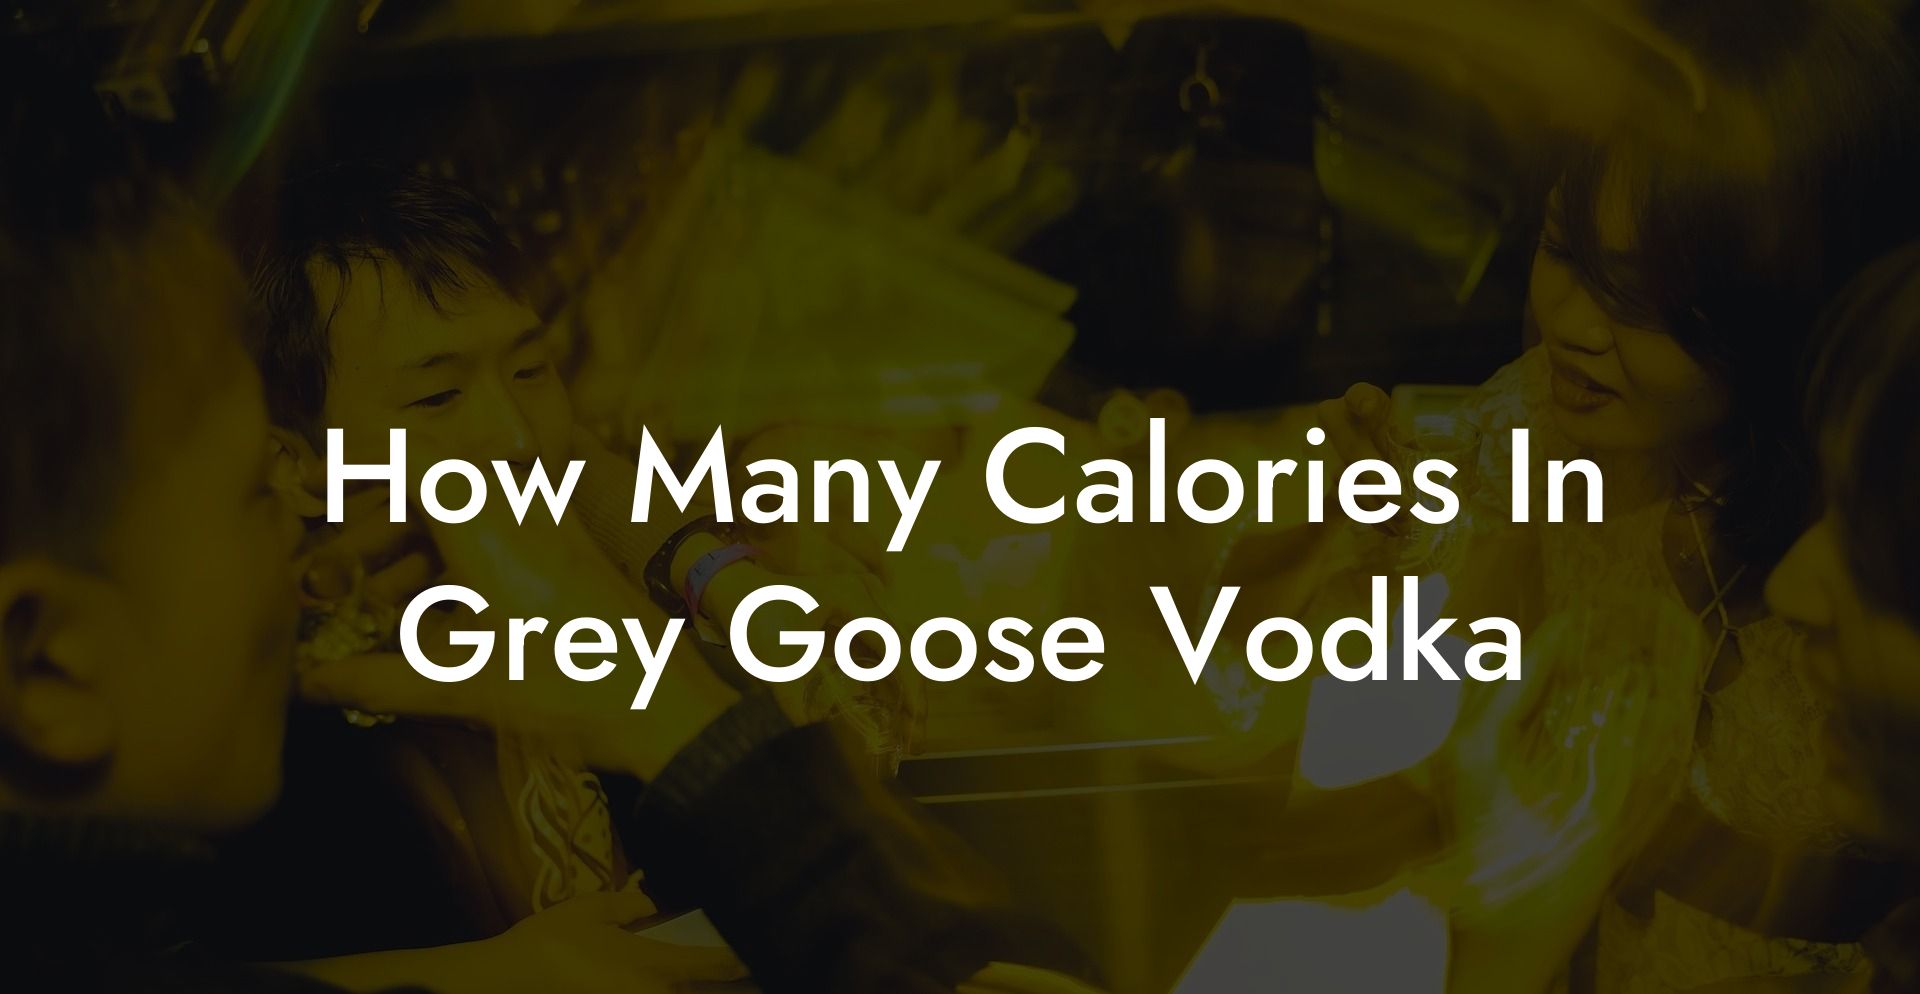 How Many Calories In Grey Goose Vodka